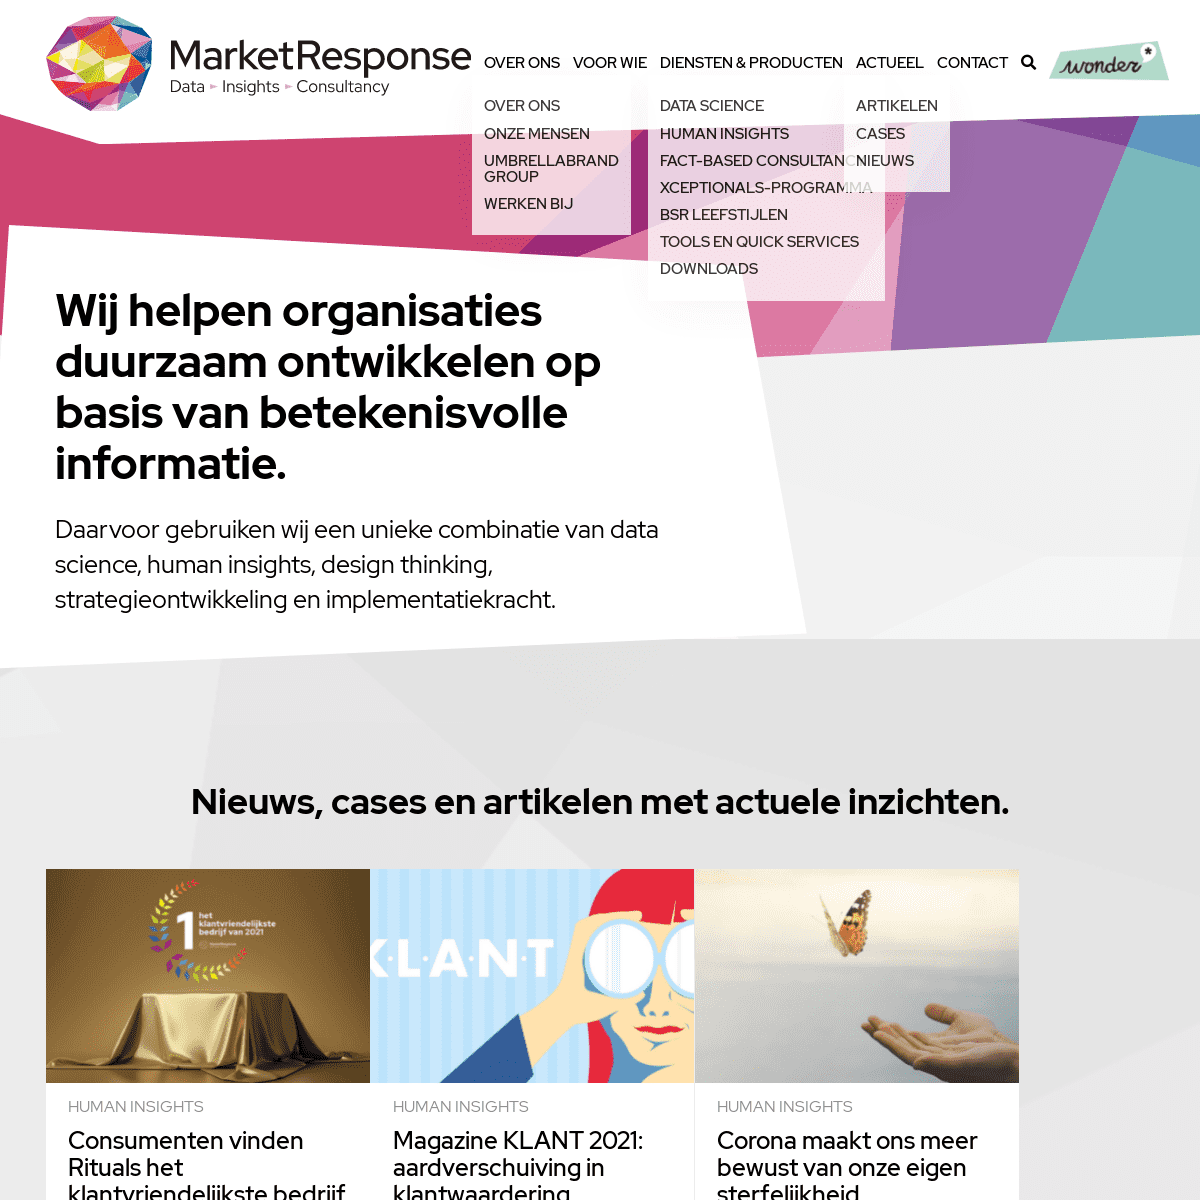 A complete backup of https://marketresponse.nl